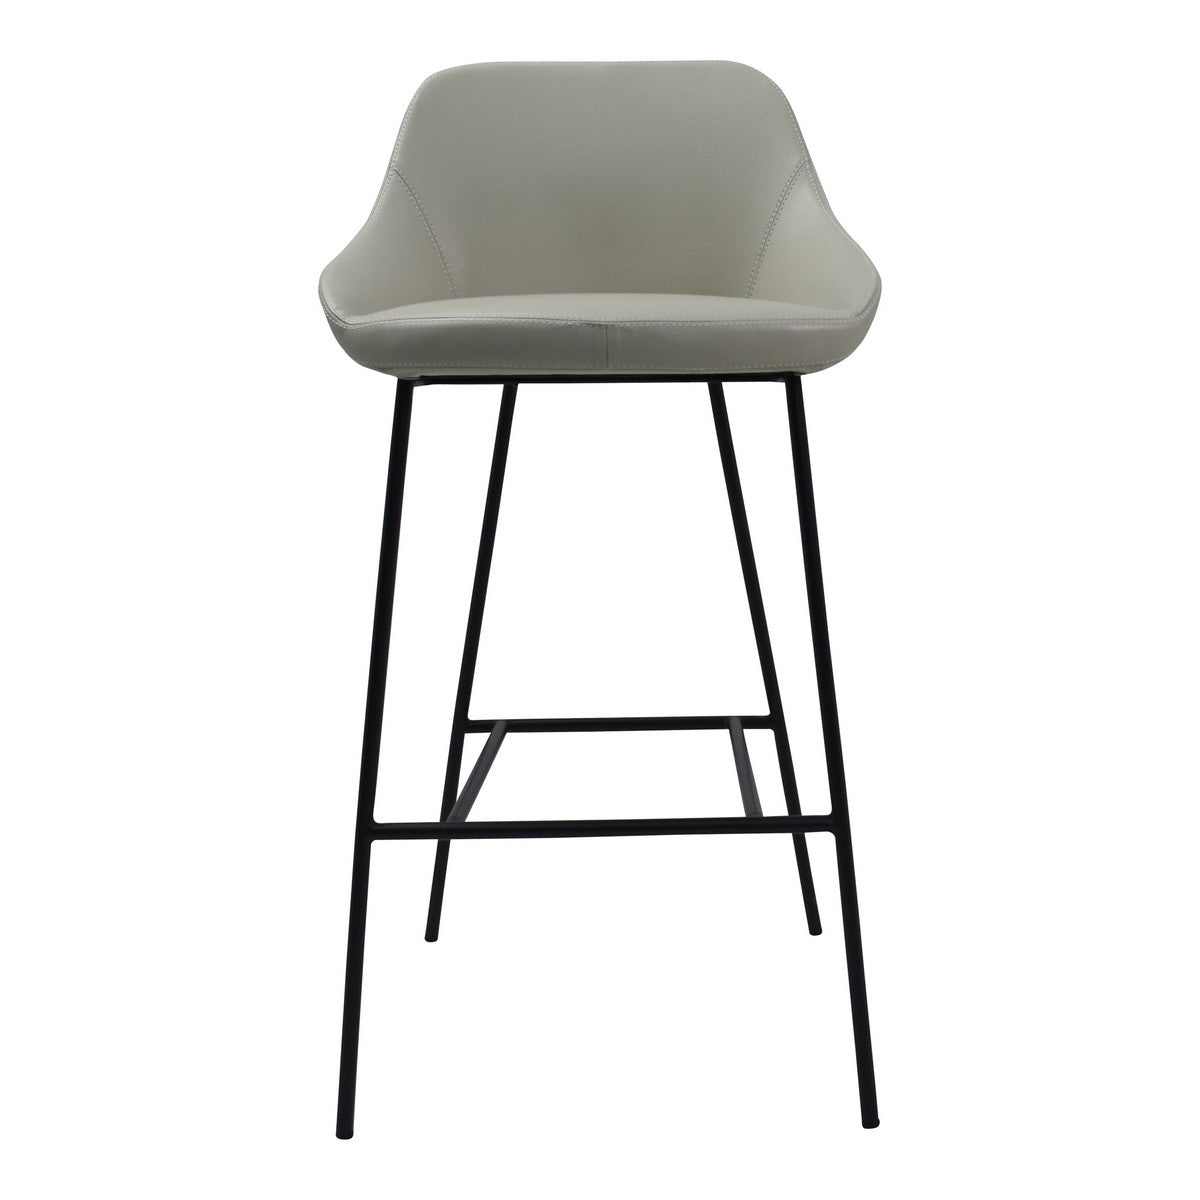 Moe's Home Collection Shelby Barstool Beige - EJ-1039-34 - Moe's Home Collection - Bar Stools - Minimal And Modern - 1